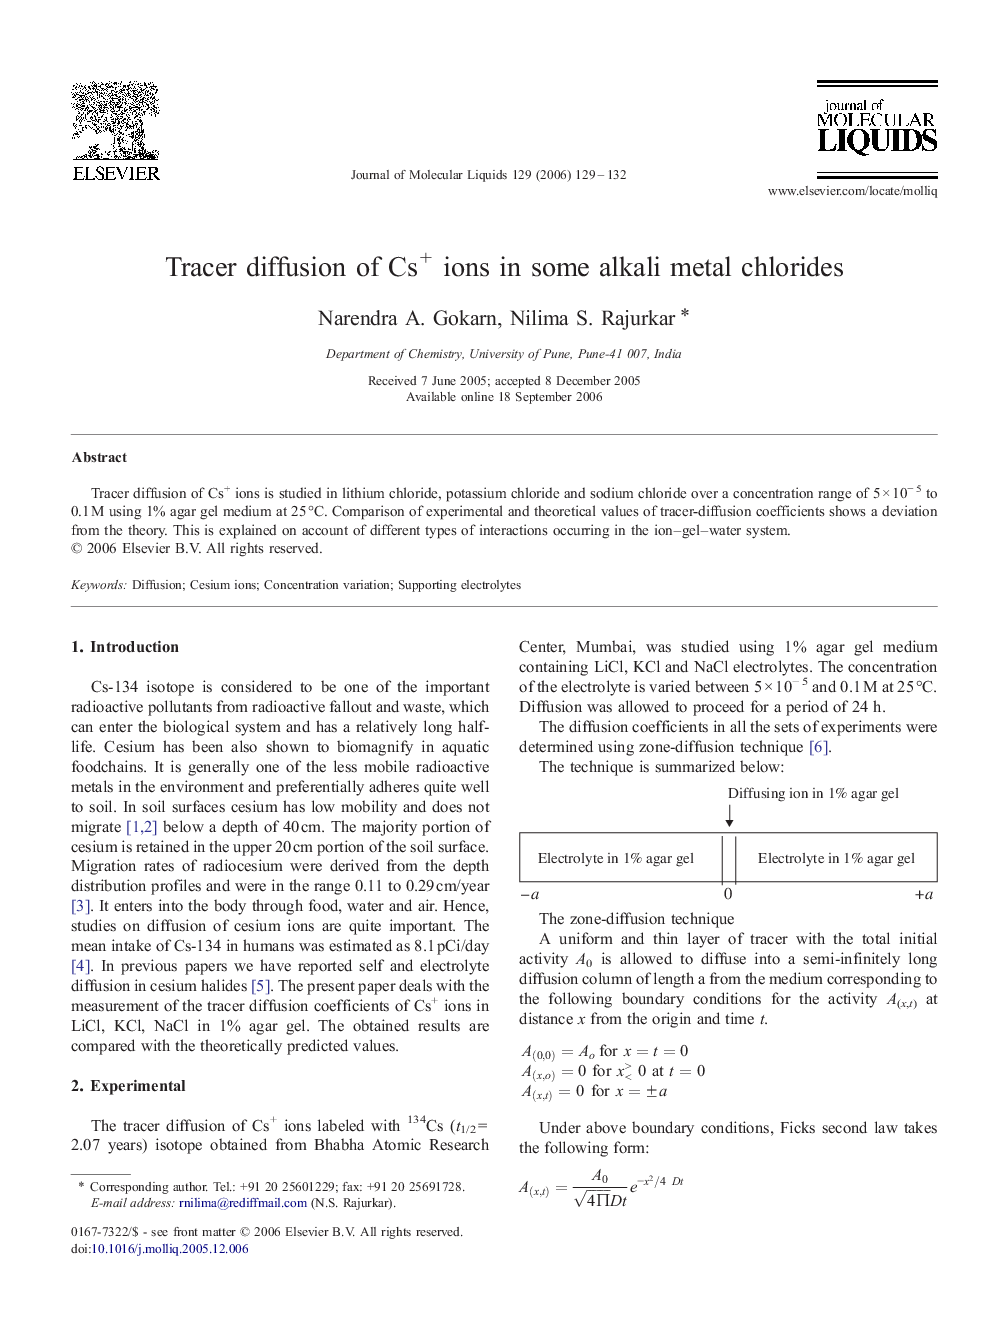 Tracer diffusion of Cs+ ions in some alkali metal chlorides